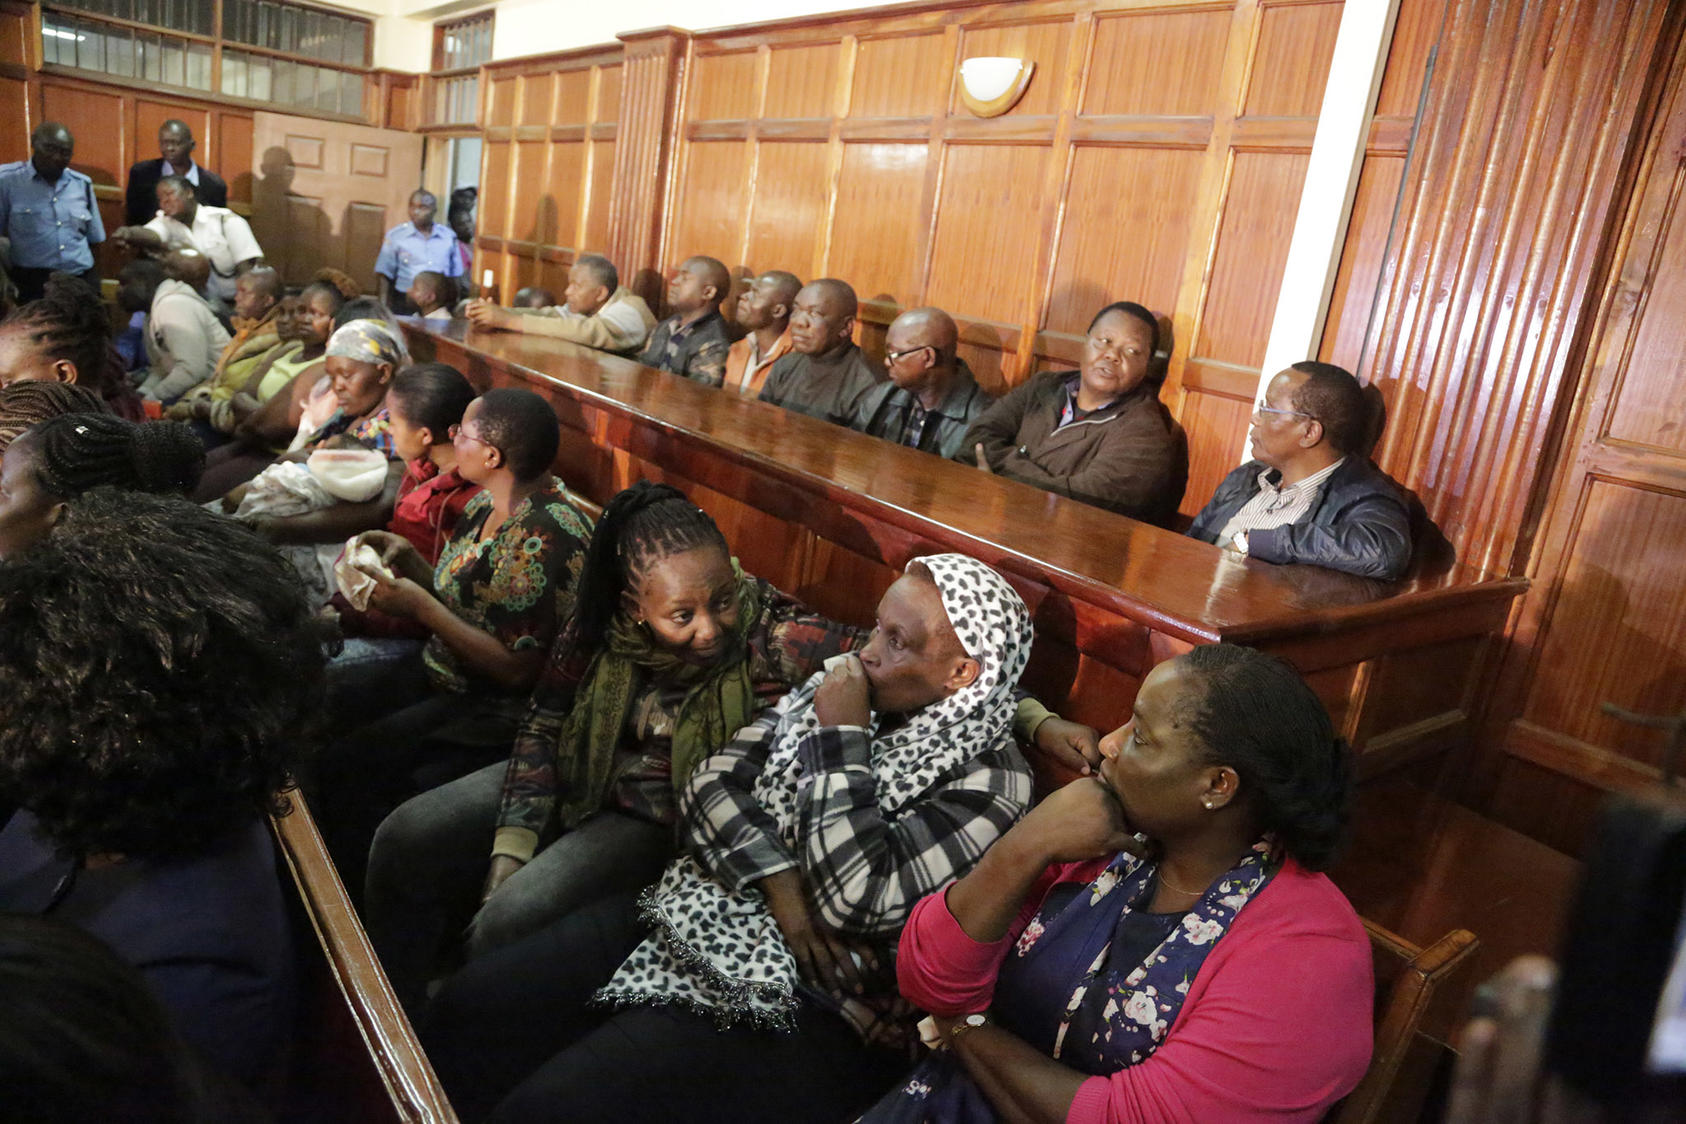 Suspects accused of corruption appear in the Mililani Law Courts in Nairobi on May 29, 2018. (Khalil Senosi/AP)